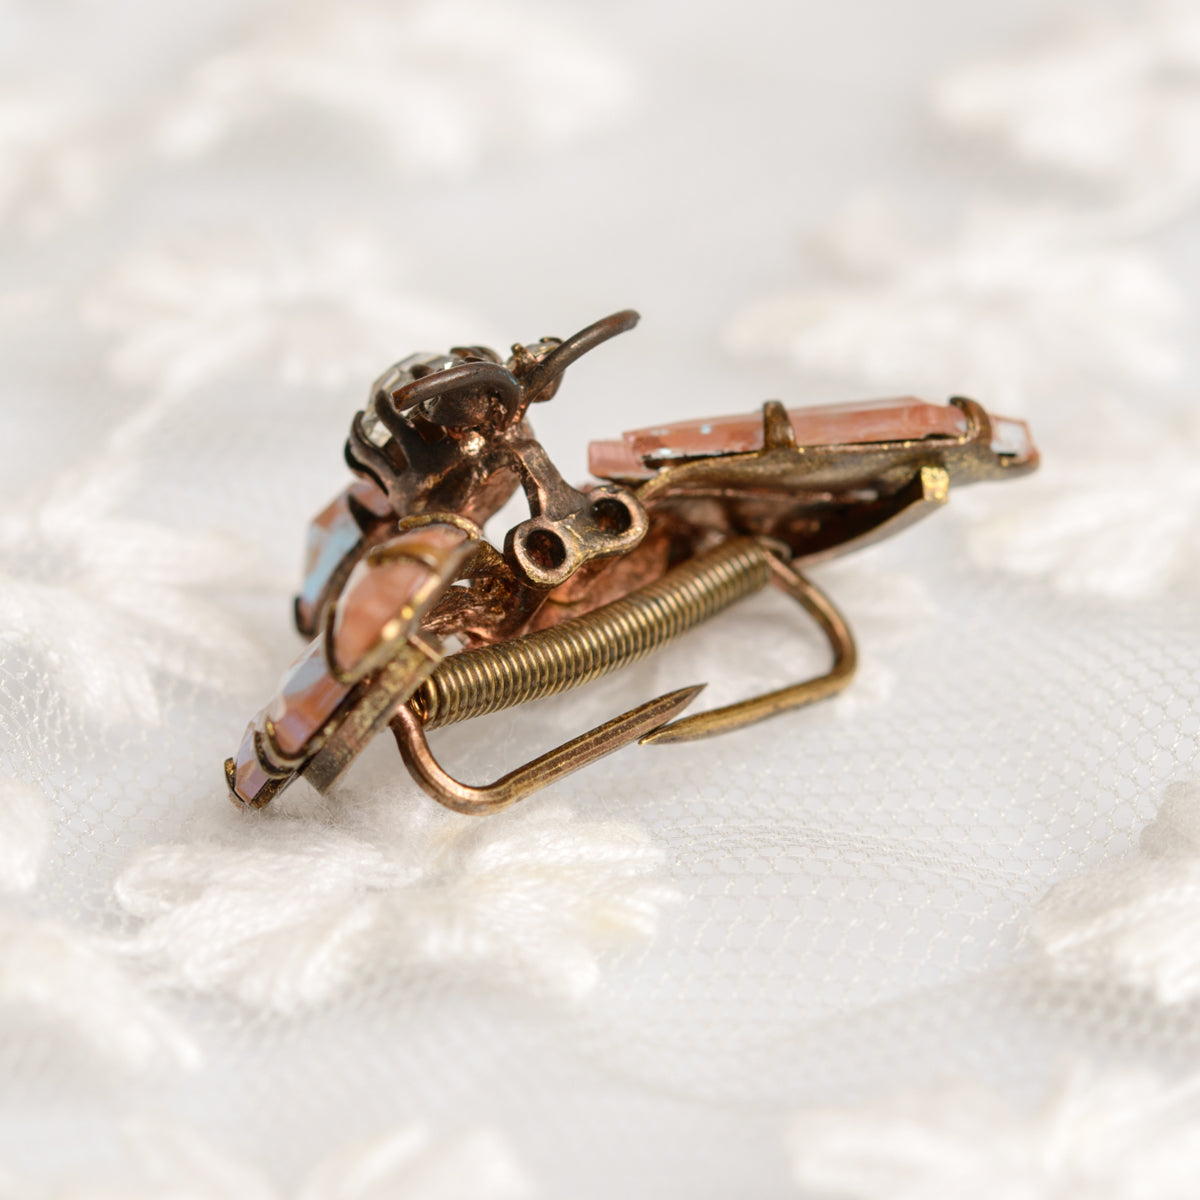 Antique Saphiret Brooch/Pin Butterfly Design Victorian 19th Century (A1351)